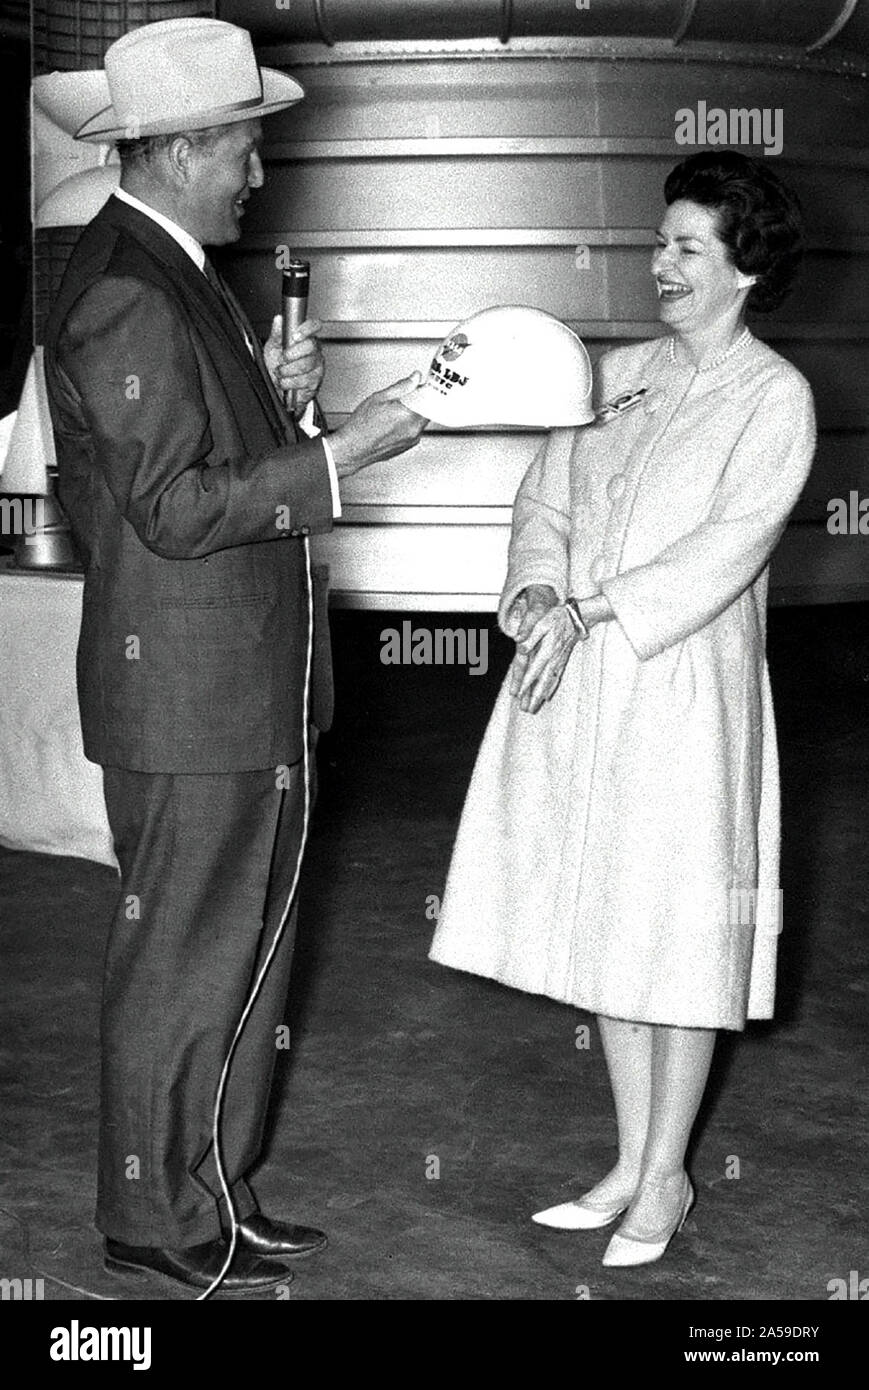 Marshall Space Flight Center Director Dr. Wernher von Braun presents Lady Bird Johnson with an inscribed hard hat during the First Lady's March 24, 1964 visit. Stock Photo